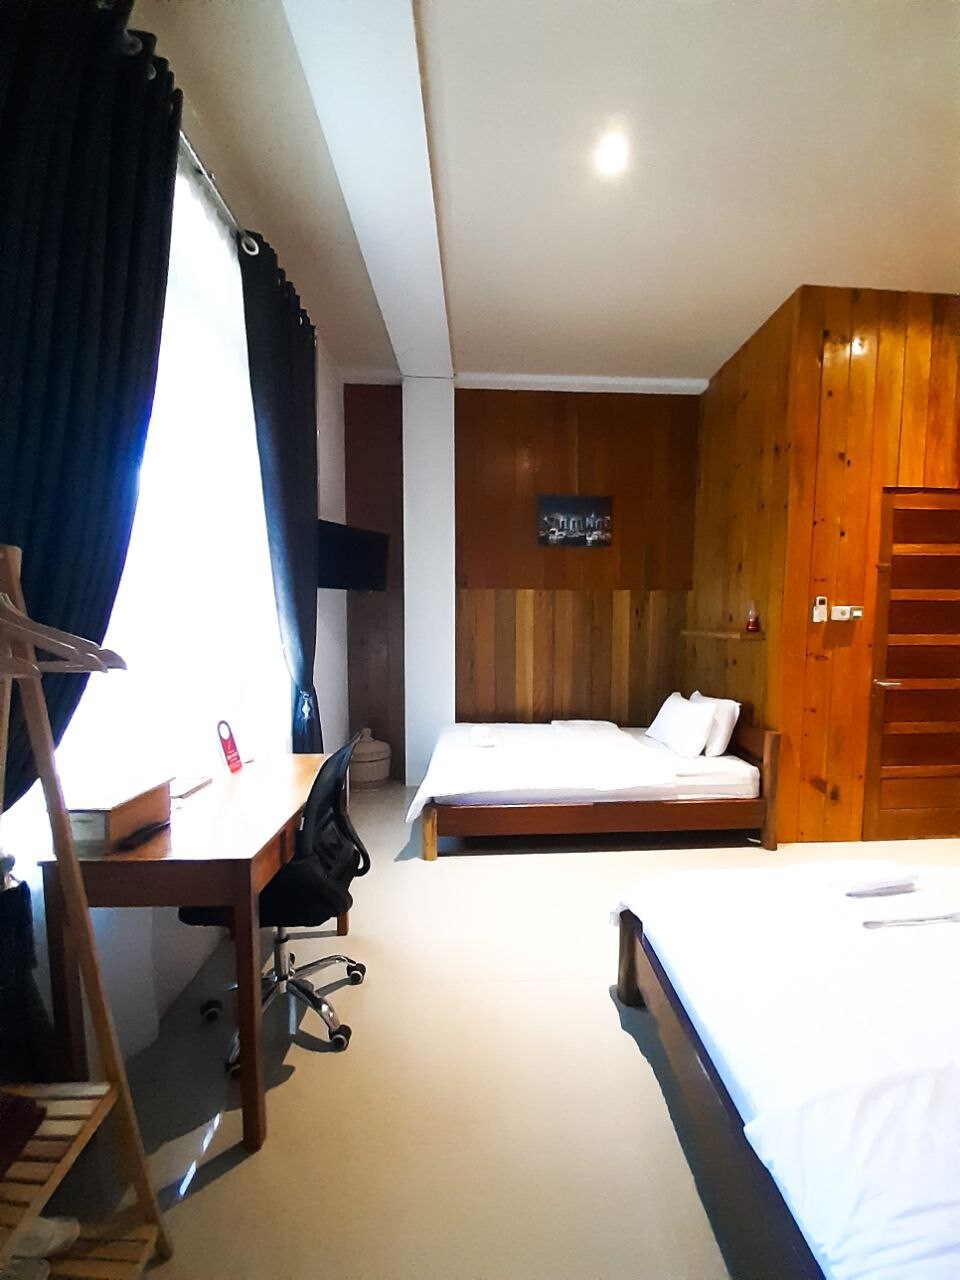 New York Room-a Boutique Hotel in Banda Aceh